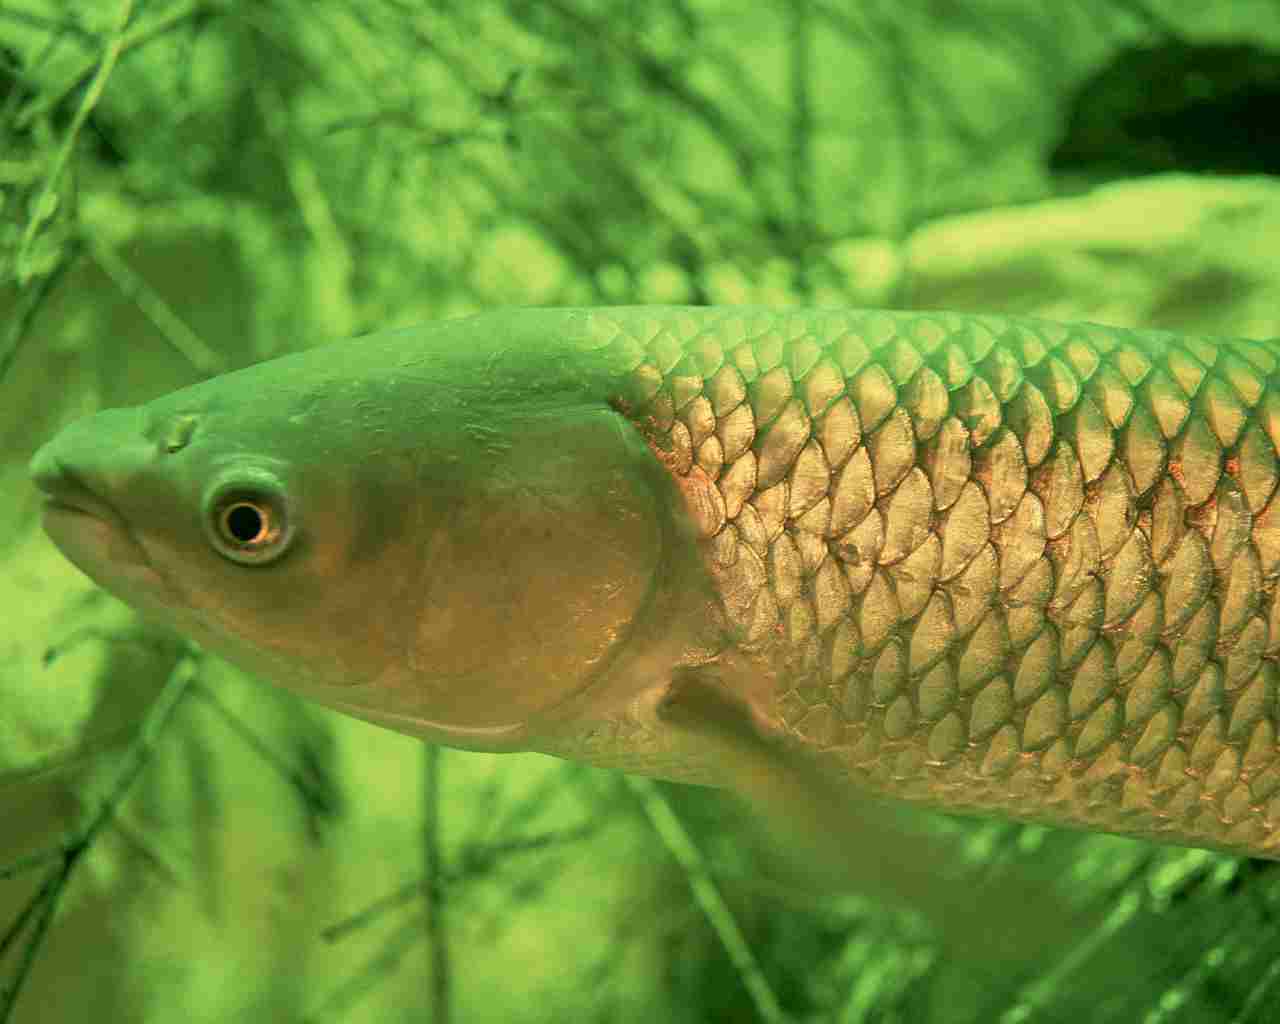 Are Fish Carnivores: Fish Like Mbuna and Grass Carp are Herbivorous (Credit: Engbretson, Eric 2004)